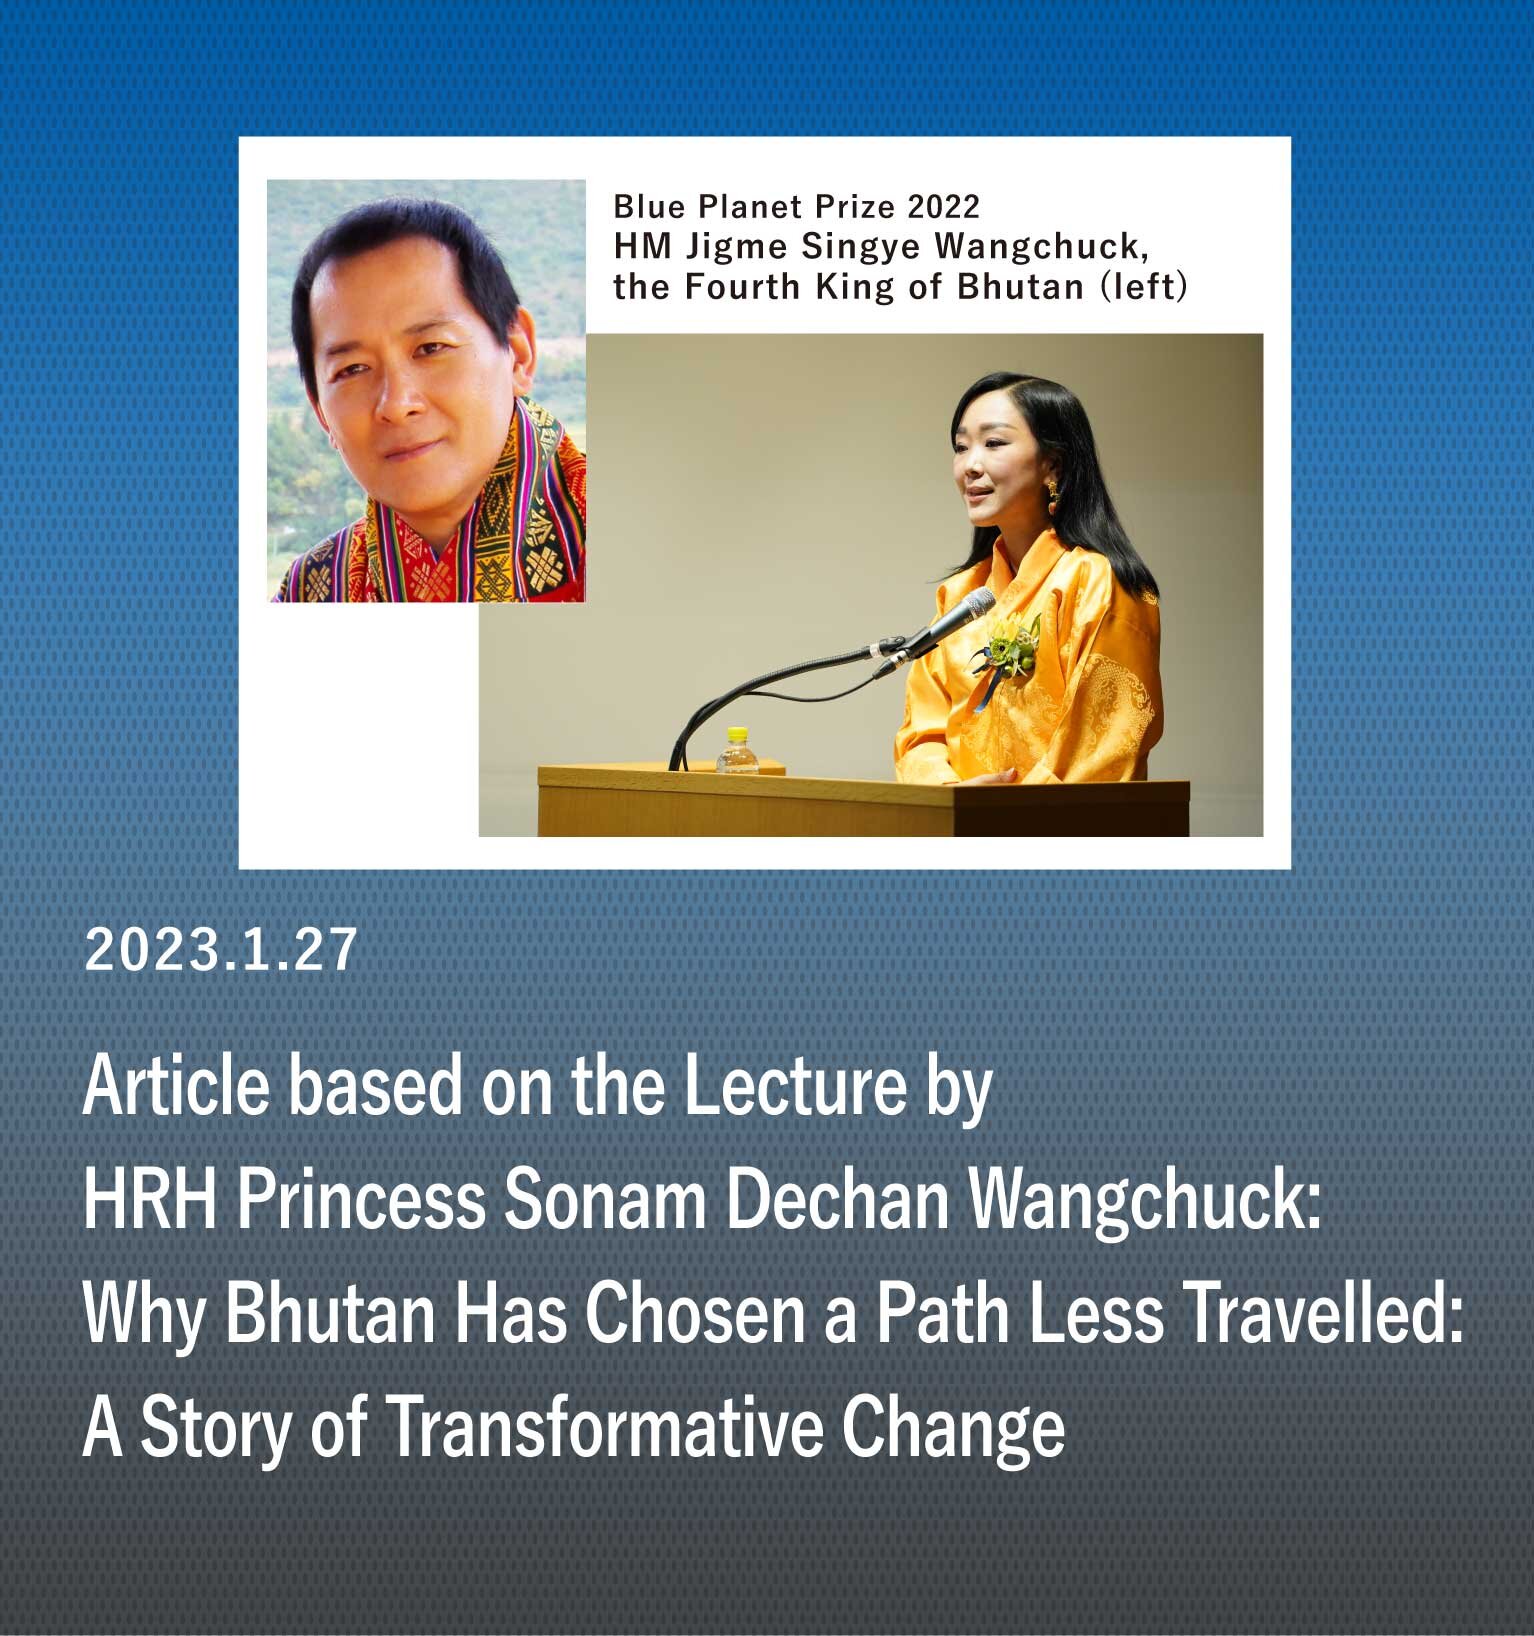 Why Bhutan Has Chosen a Path Less Travelled: A Story of Transformative Change by Her Royal Highness Princess Sonam Dechan Wangchuck -- From the 2022 Blue Planet Prize Commemorative Lecture